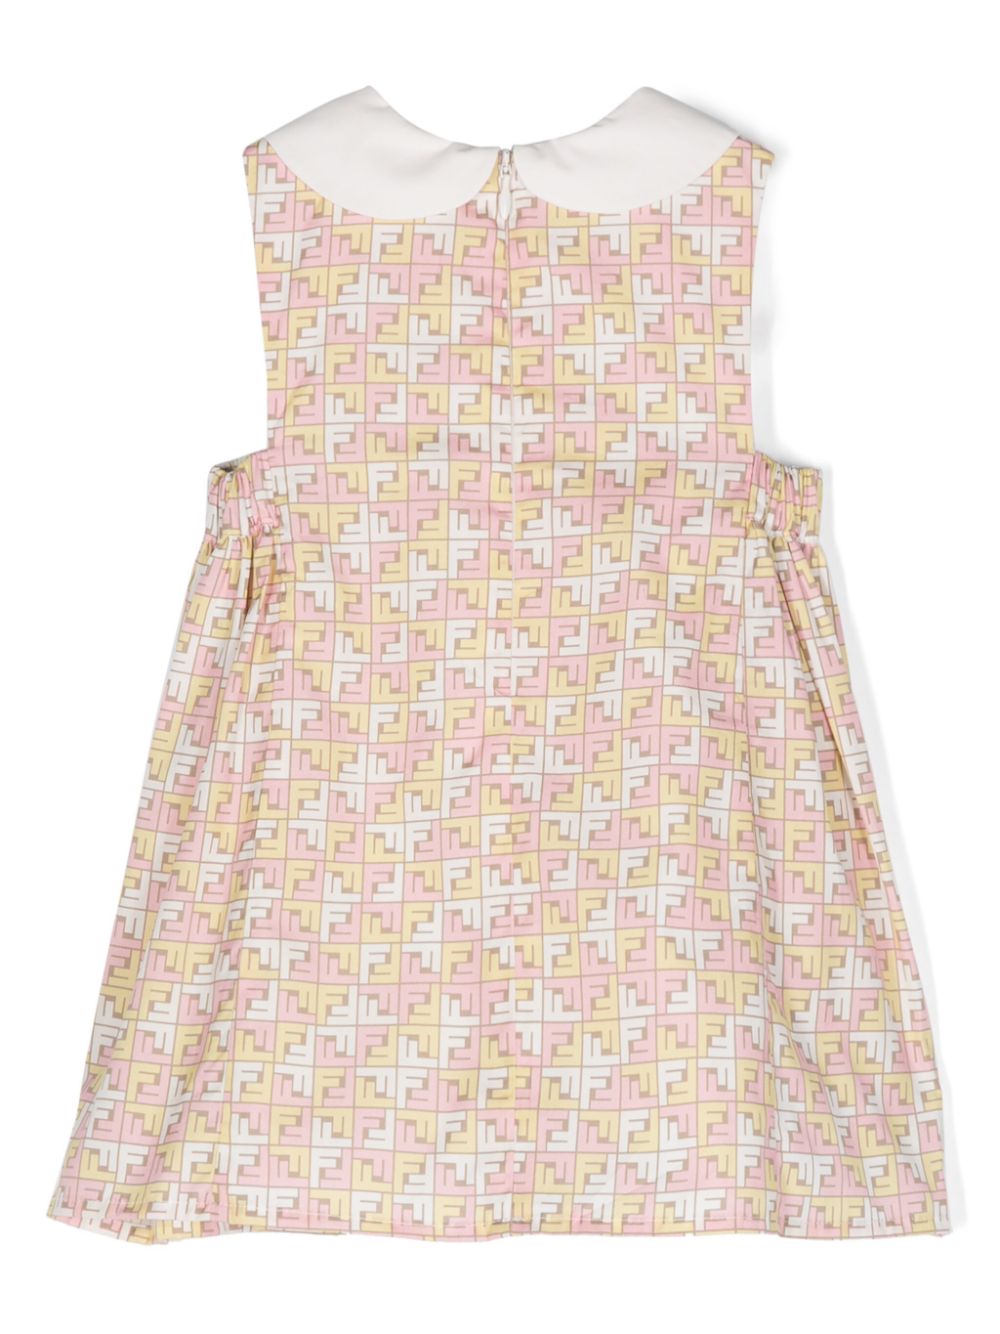 White and pink dress for baby girl